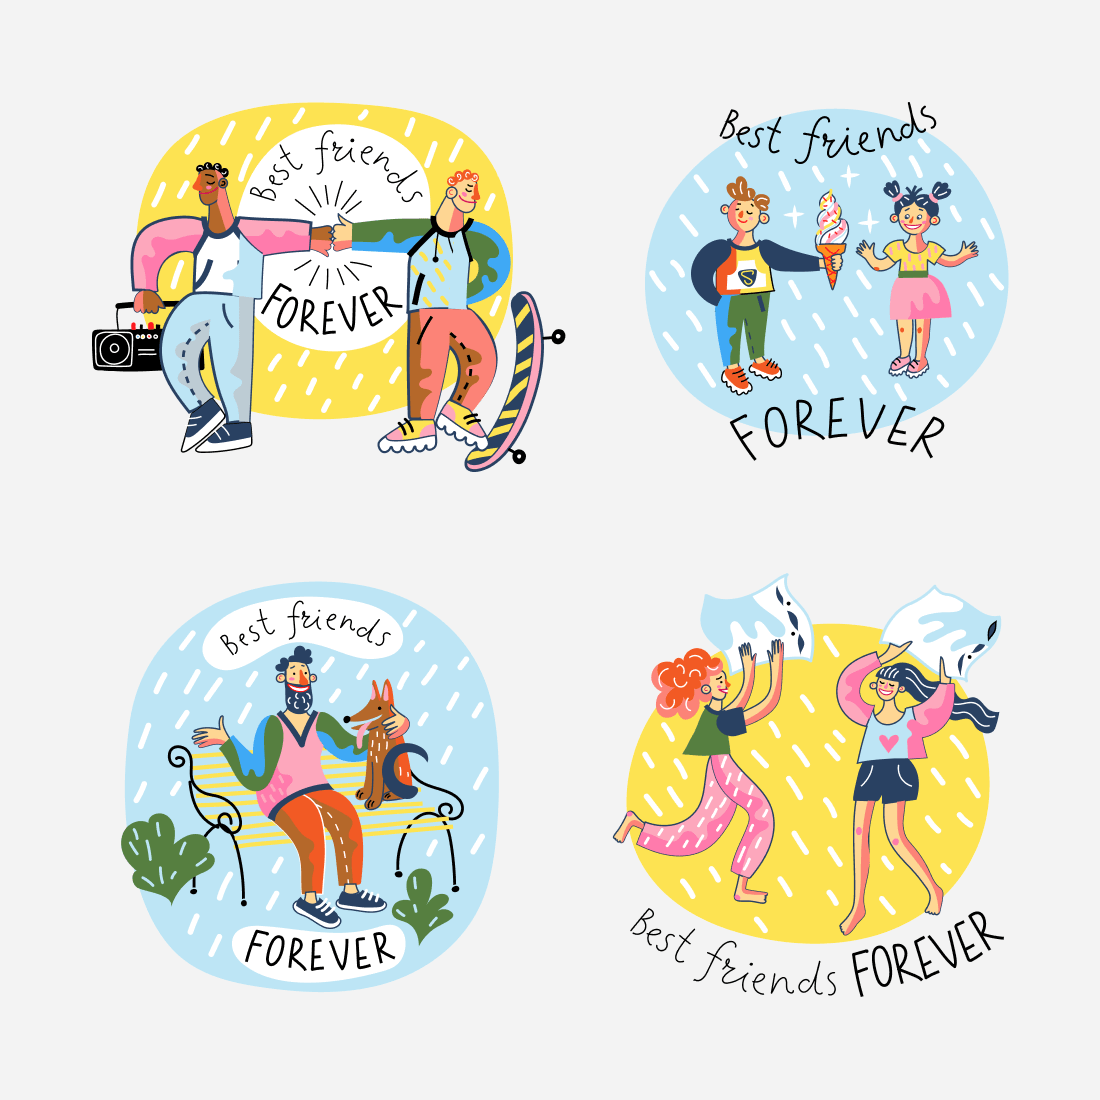 Four drawings of friends on a round background.